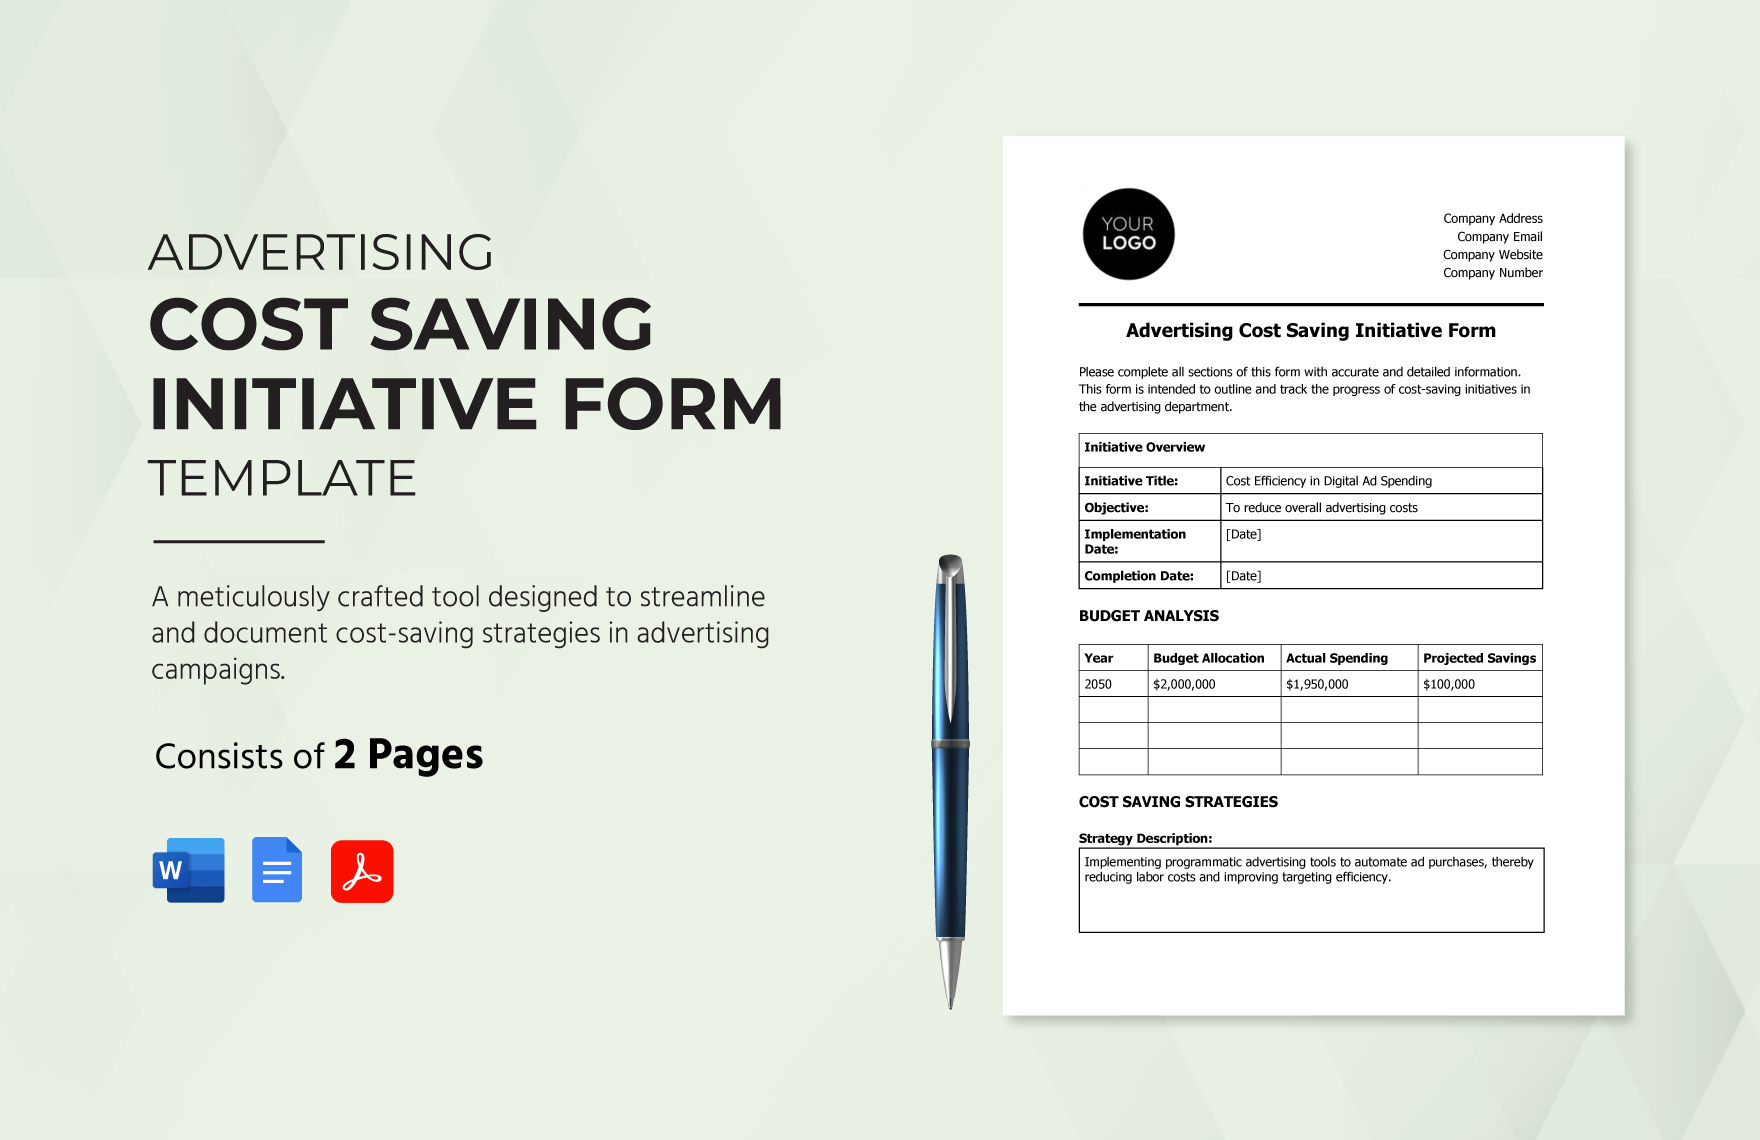 Advertising Cost Saving Initiative Form Template in Word, Google Docs, PDF